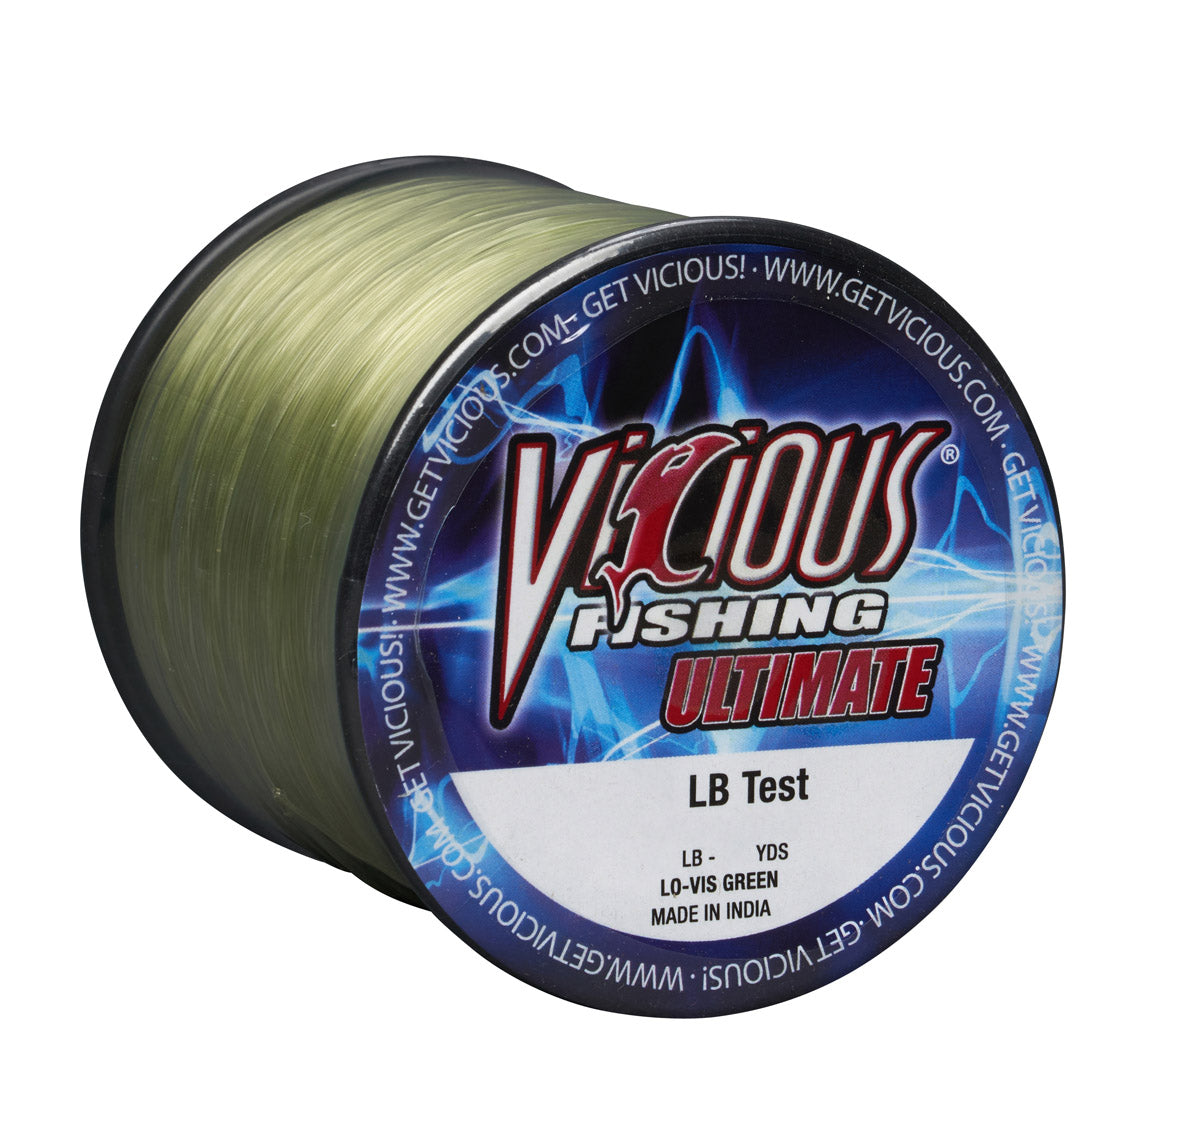 Vicious Fishing 17# Ultimate Line